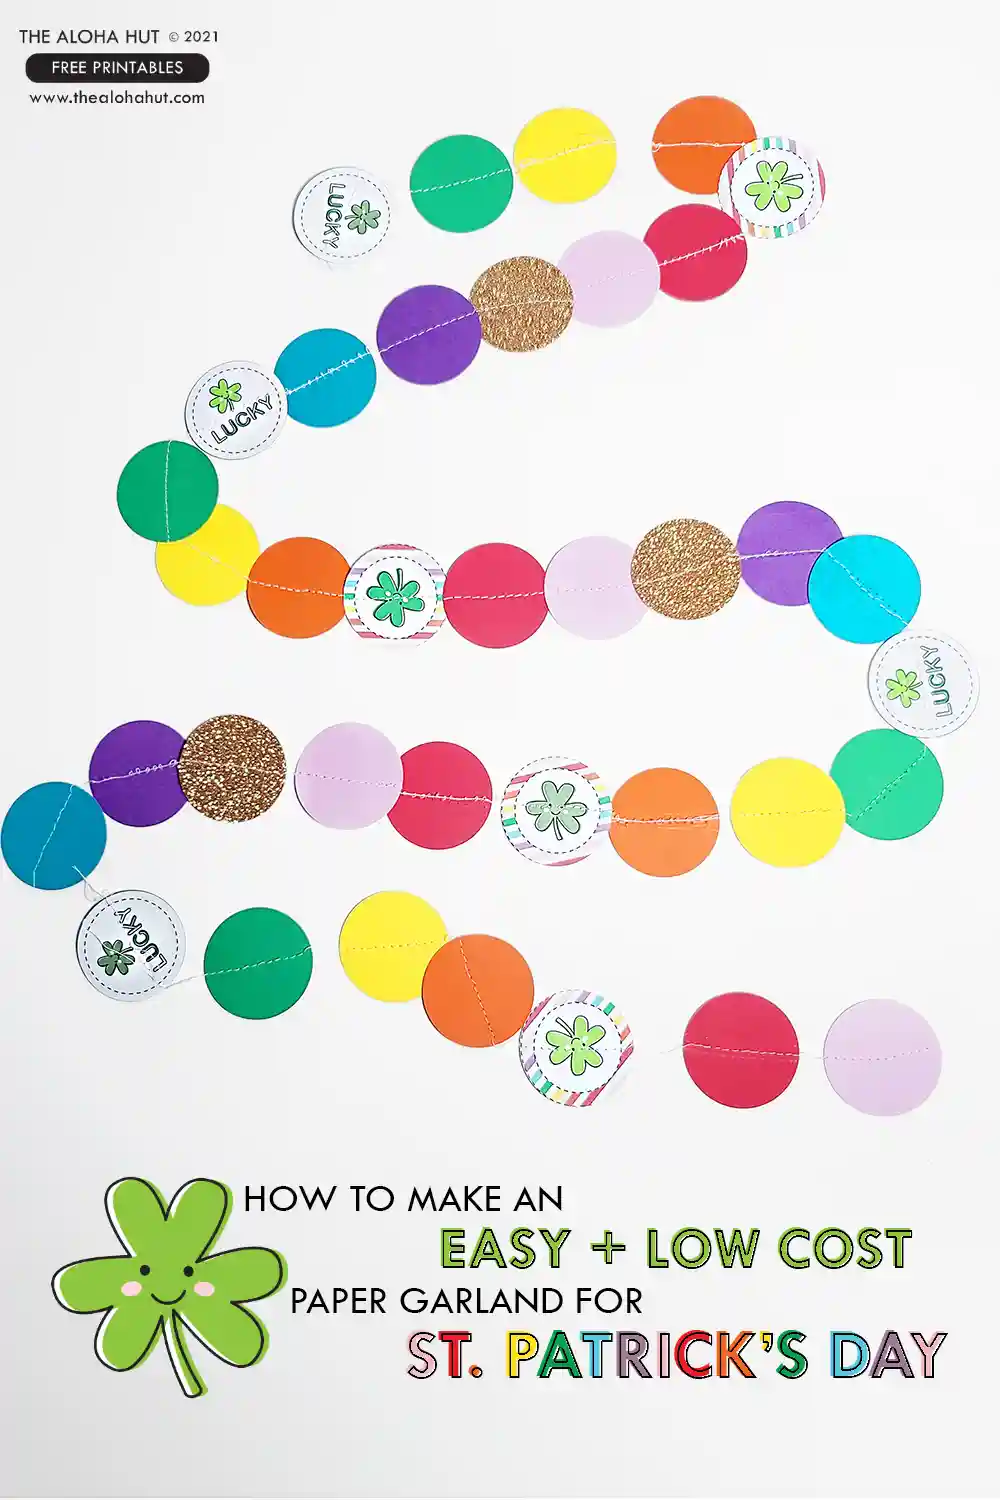 Easy St. Patrick's Day garland and ideas for how to make a rainbow paper garland to decorate for St. Patrick's day. Download our rainbow, four leaf clover, and leprechaun prints. Use a 2" circle punch to add more rainbow colors and some glittery gold circles. Then either sew them all together (it's so easy to sew paper!) or attach them to string or twine with tape. These St. Patrick's Day garlands would be fun to add to your party decor!